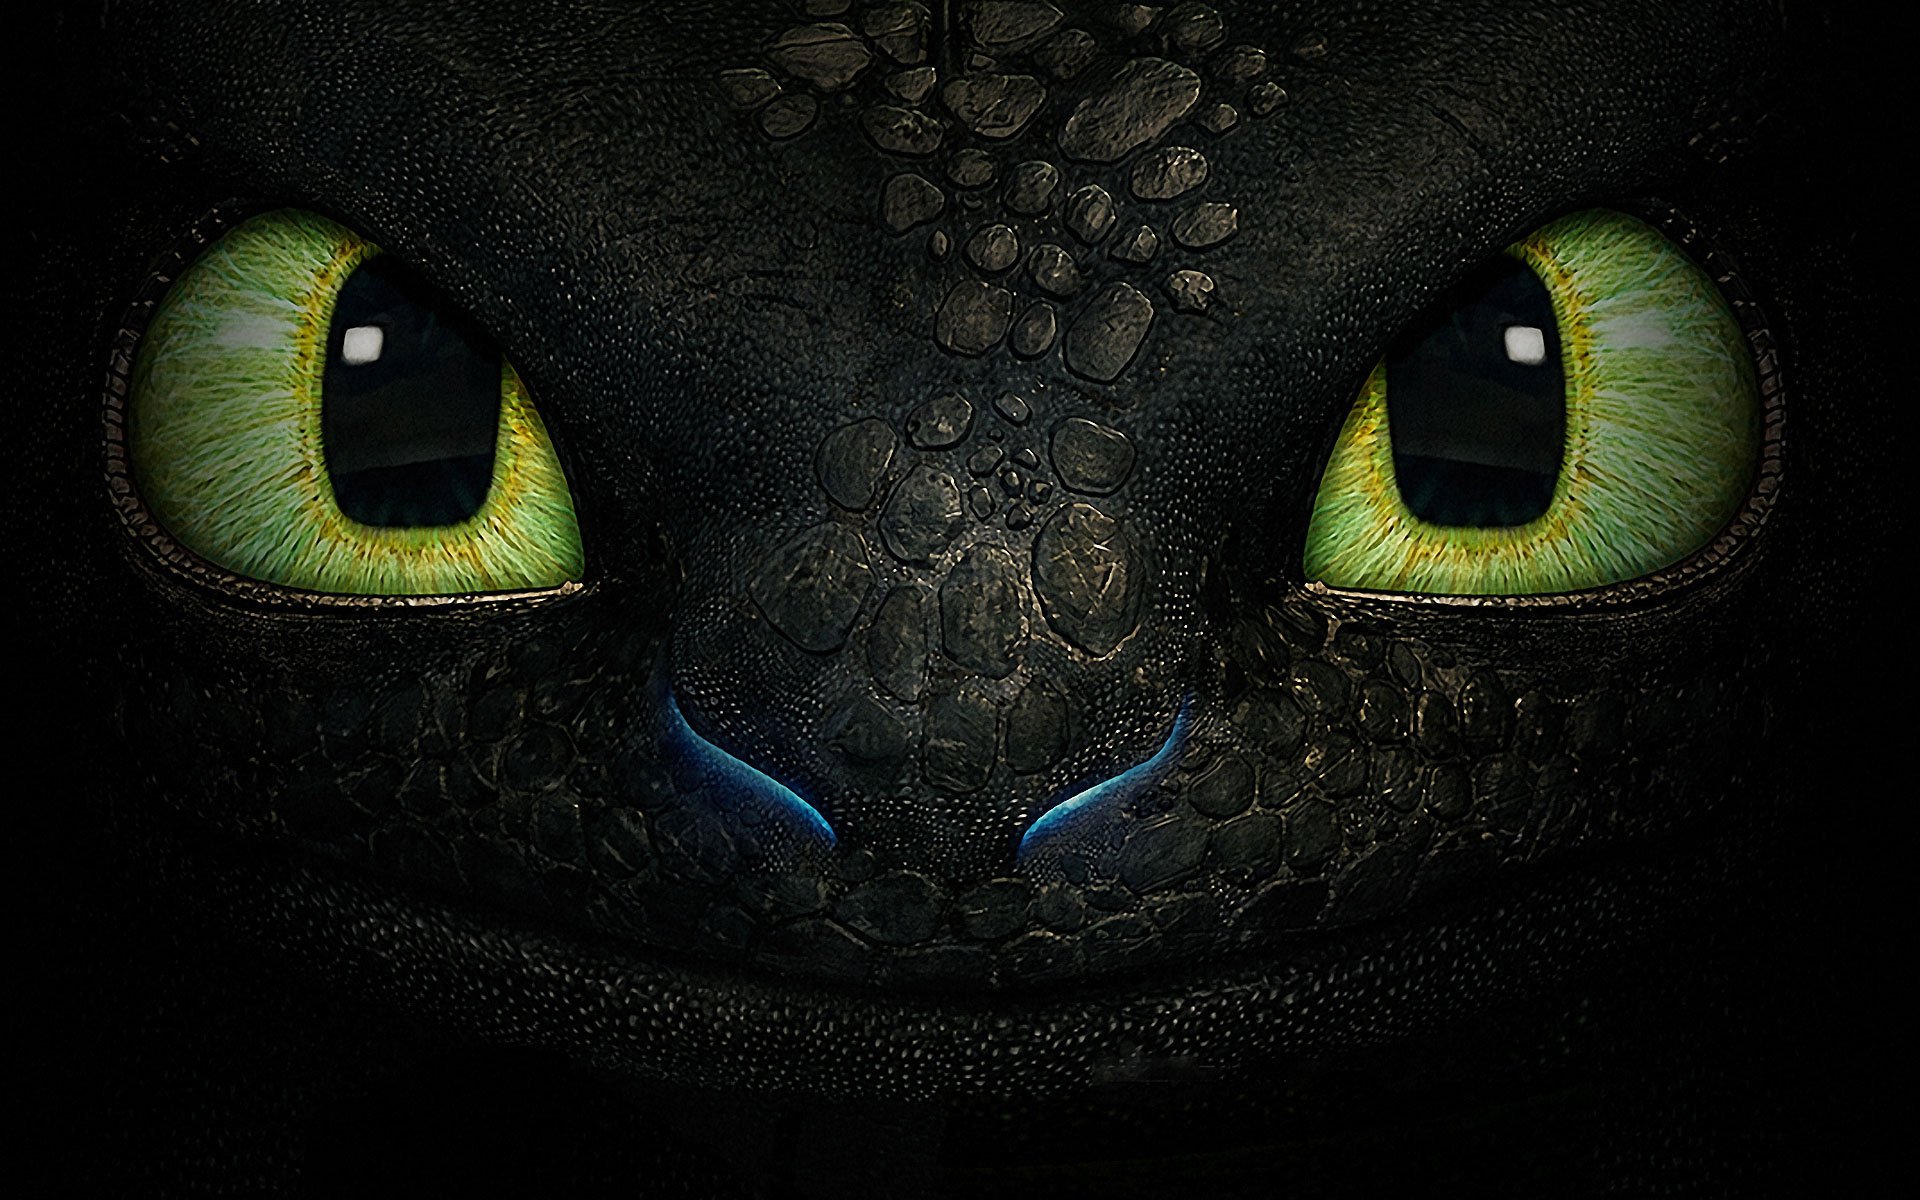 How To Train Your Dragon 2 Wallpaper Hd Collection HD Wallpapers Download Free Images Wallpaper [wallpaper981.blogspot.com]